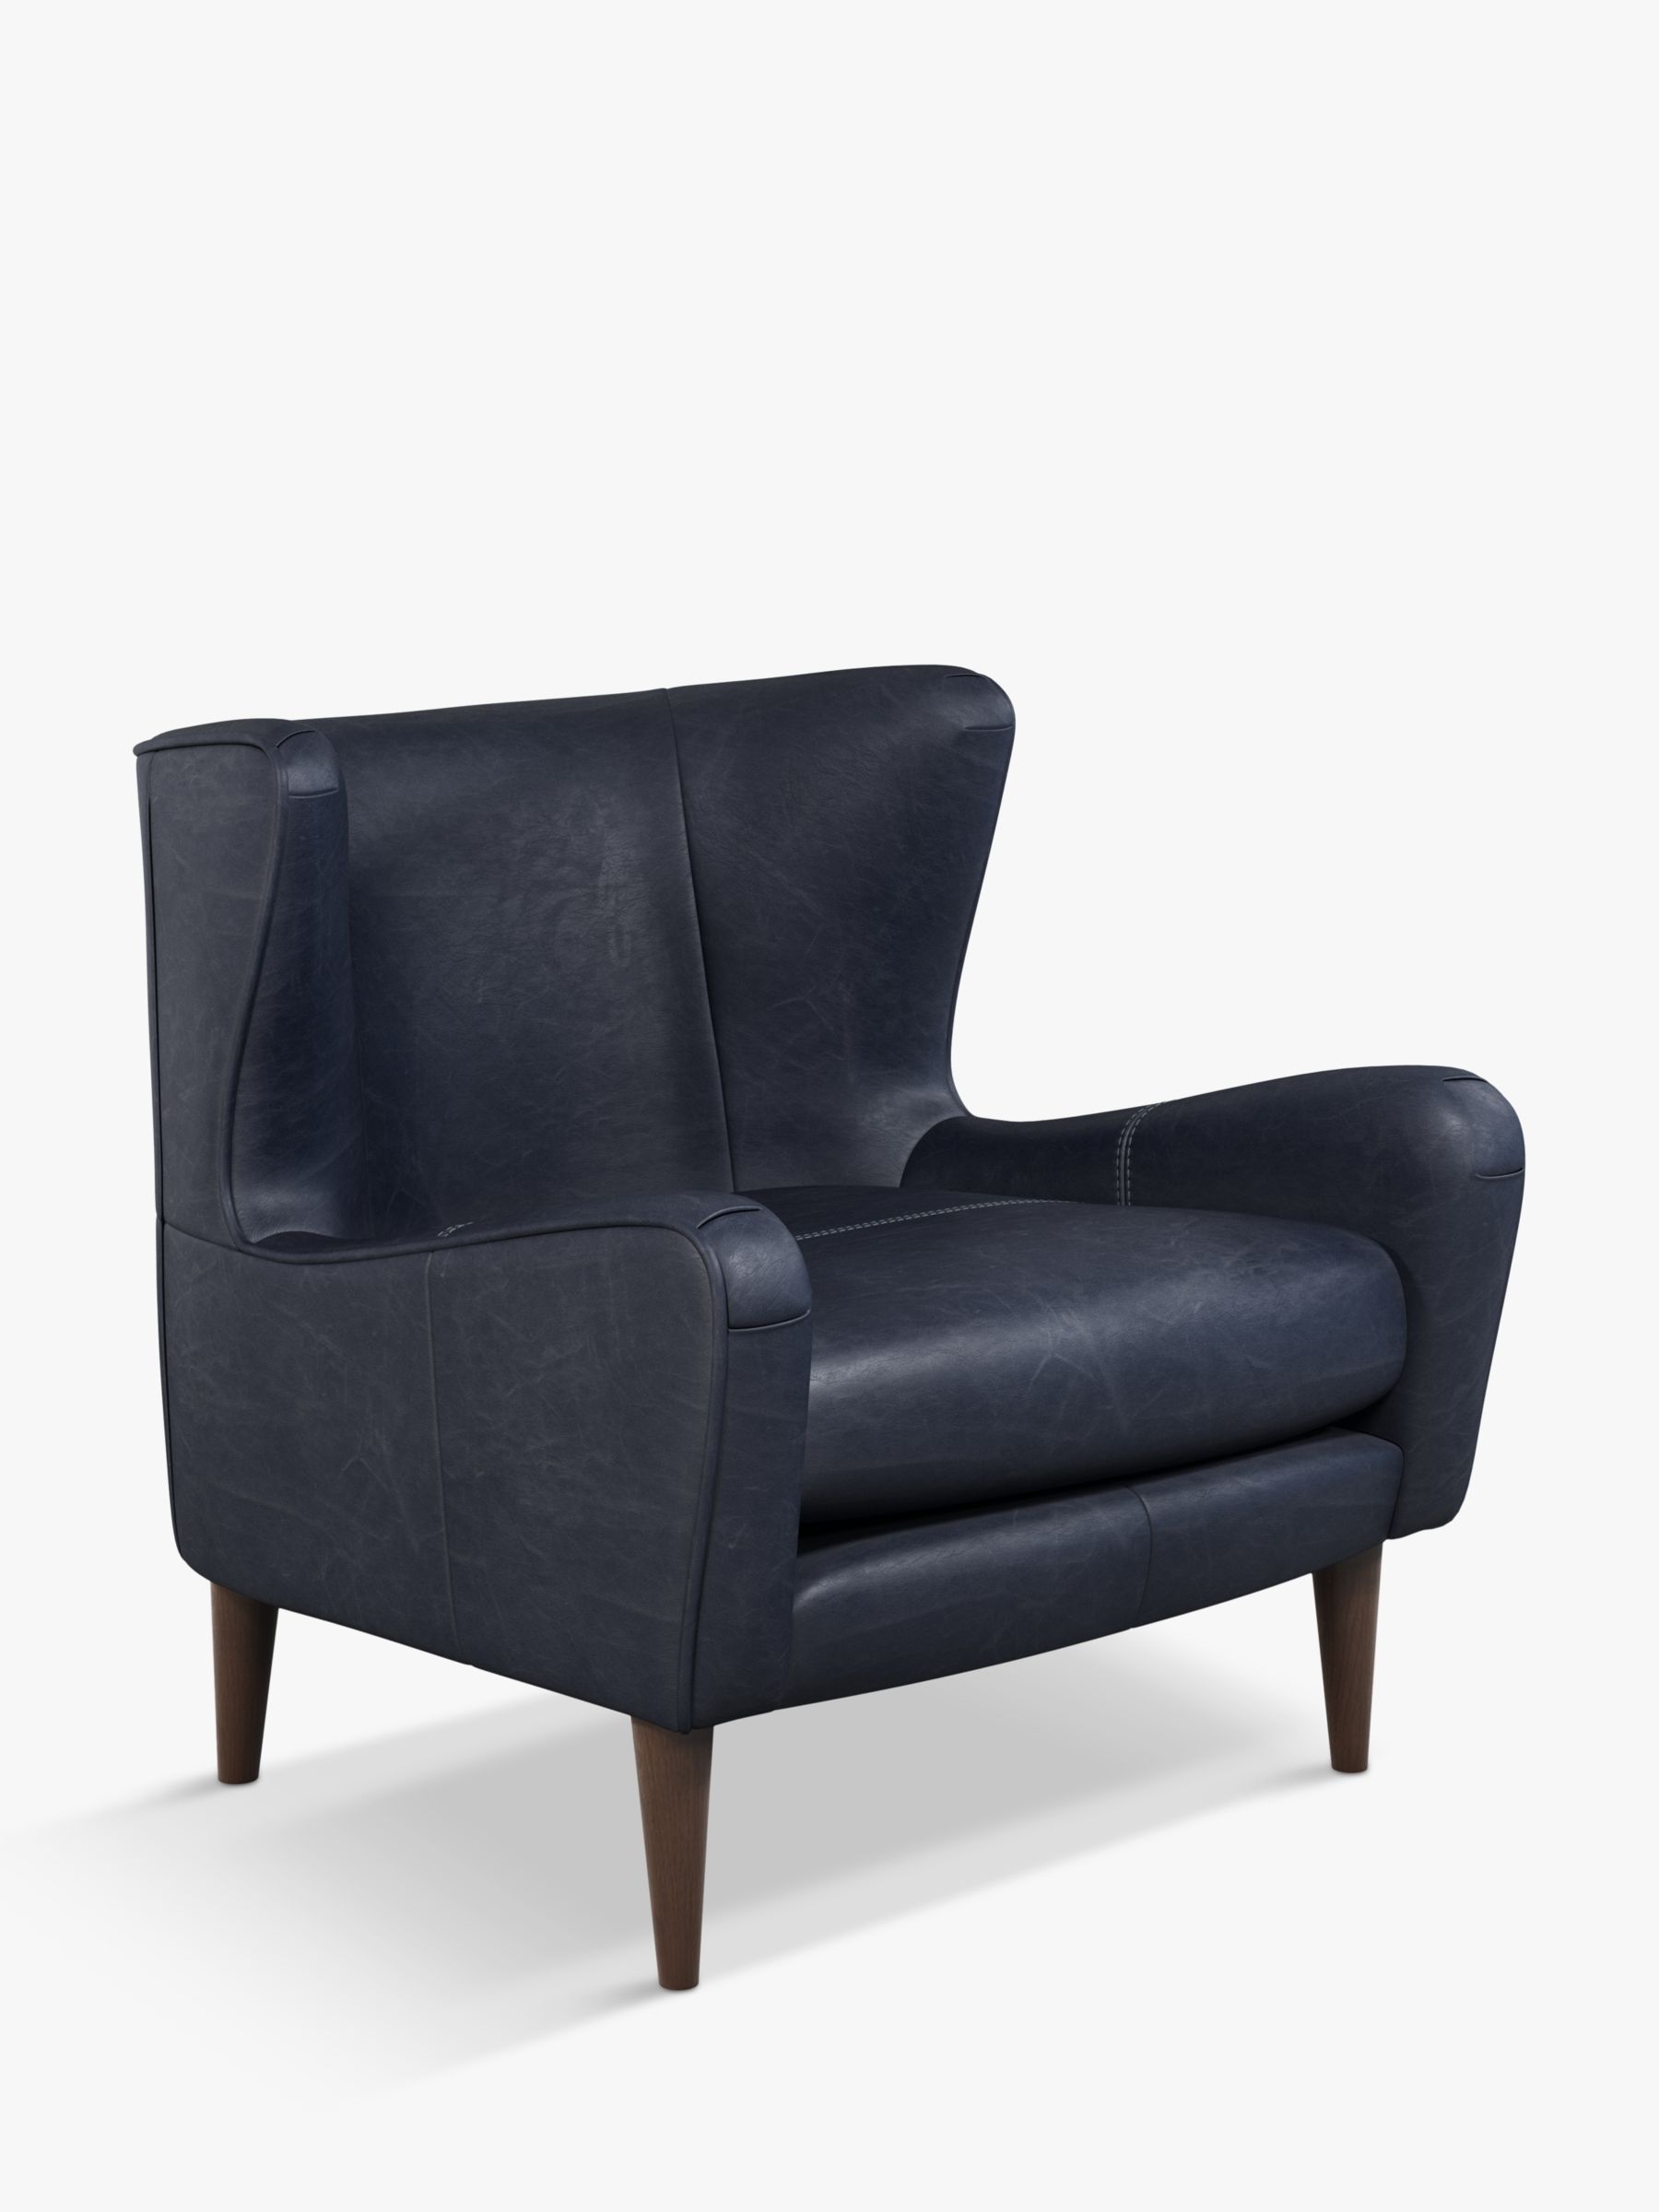 Photo of John lewis + swoon keats wingback leather armchair sellvagio blue